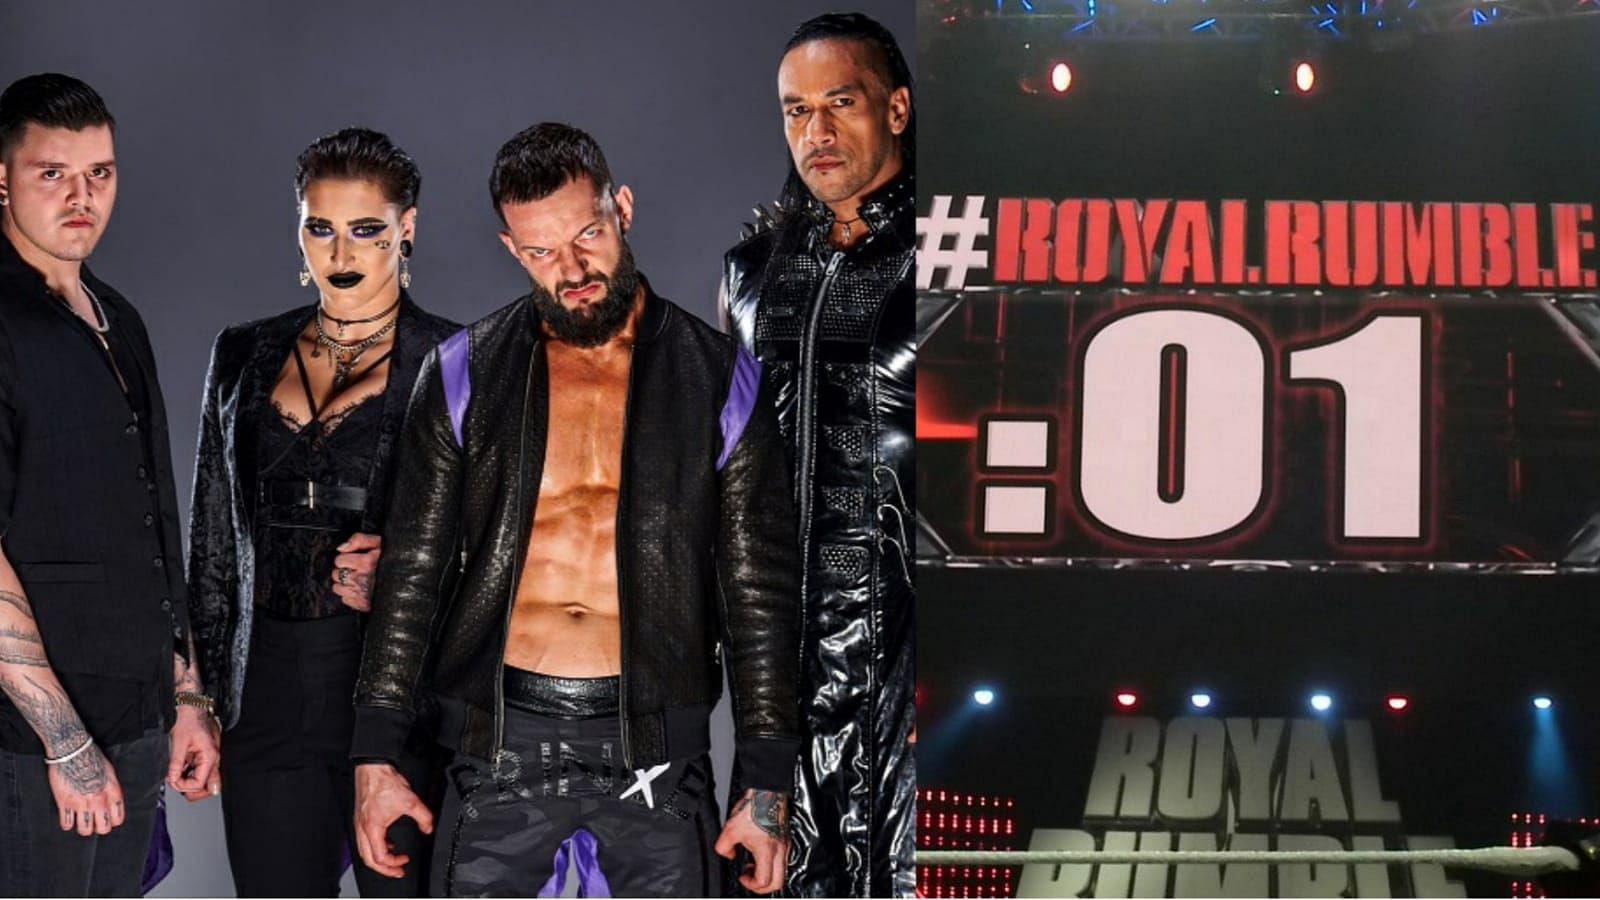 The Judgement Day members will be in action on WWE Royal Rumble!